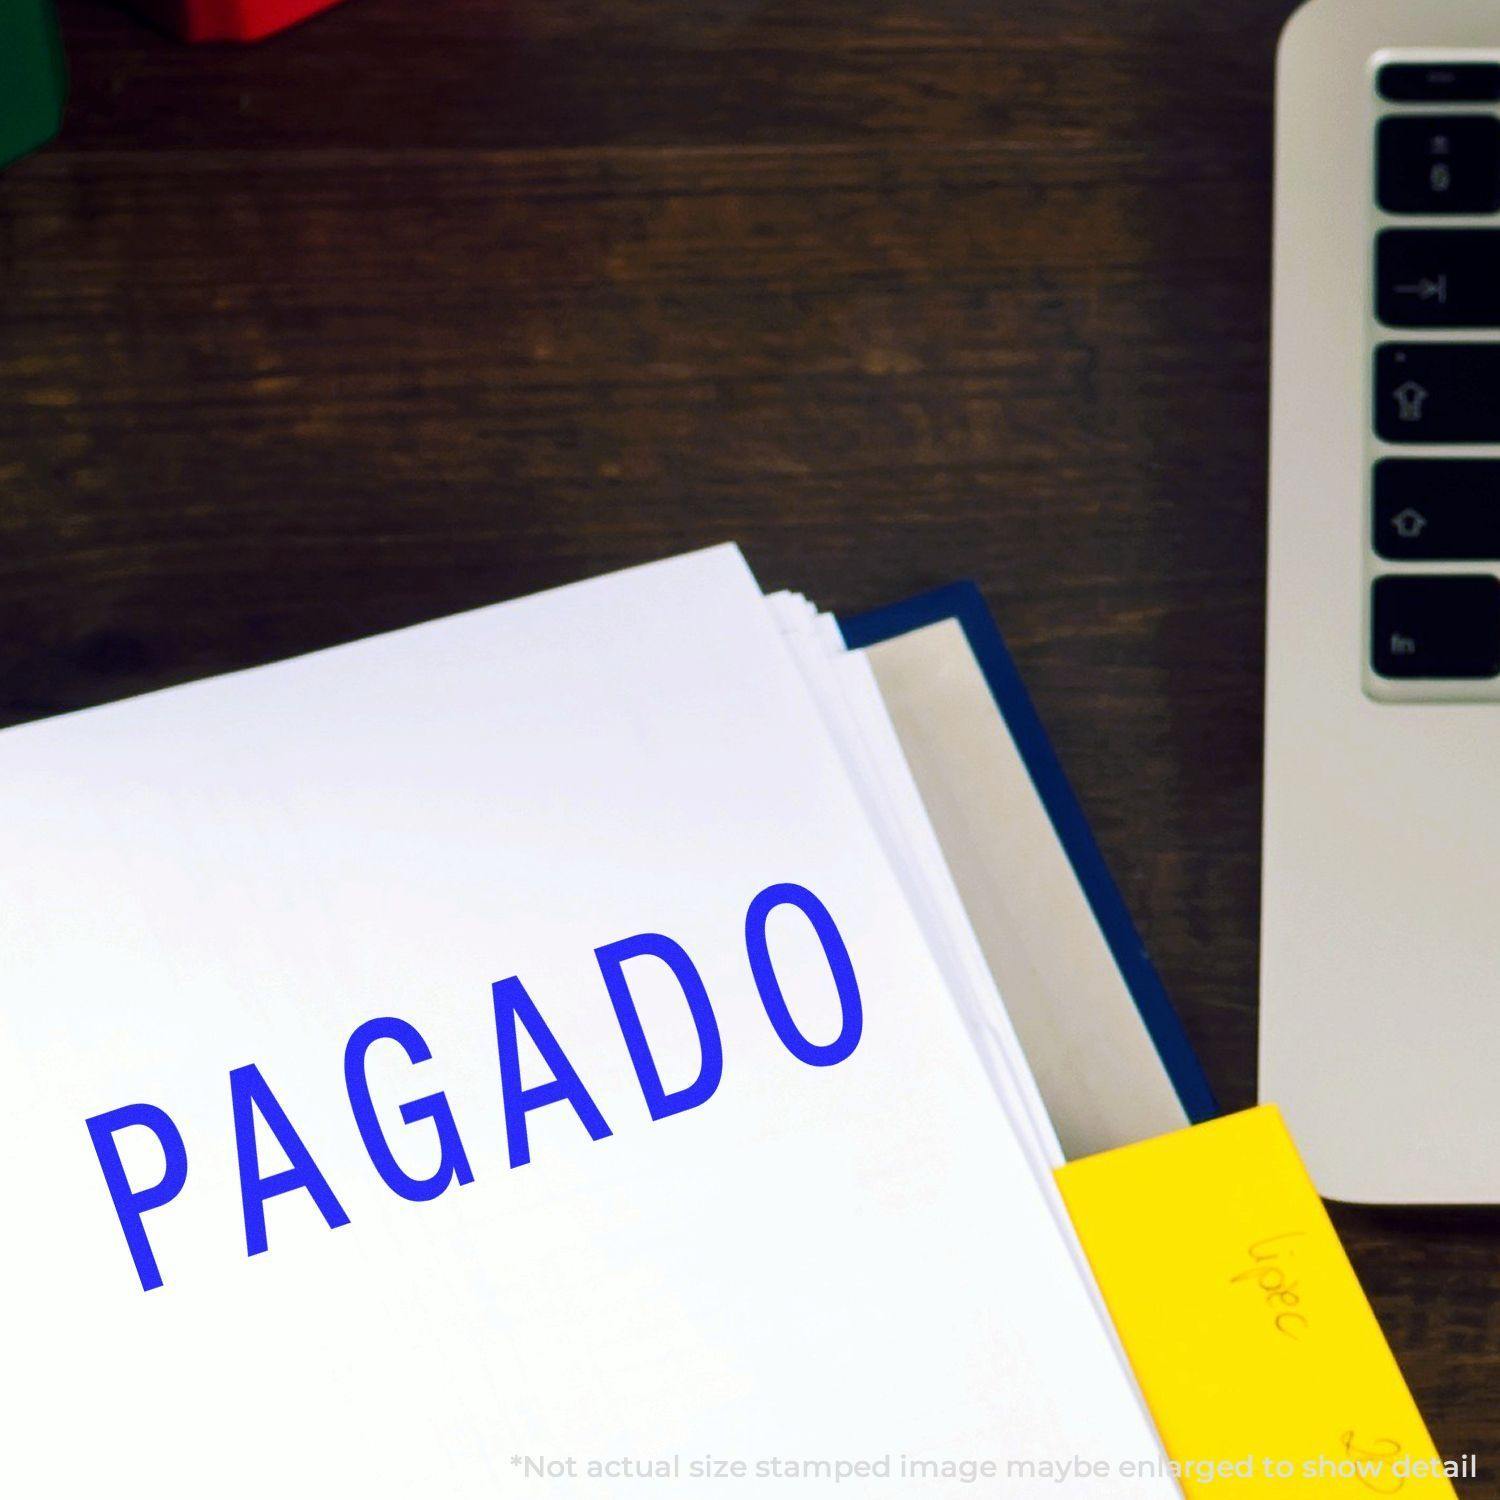 A stock office rubber stamp with a stamped image showing how the text "PAGADO" is displayed after stamping.